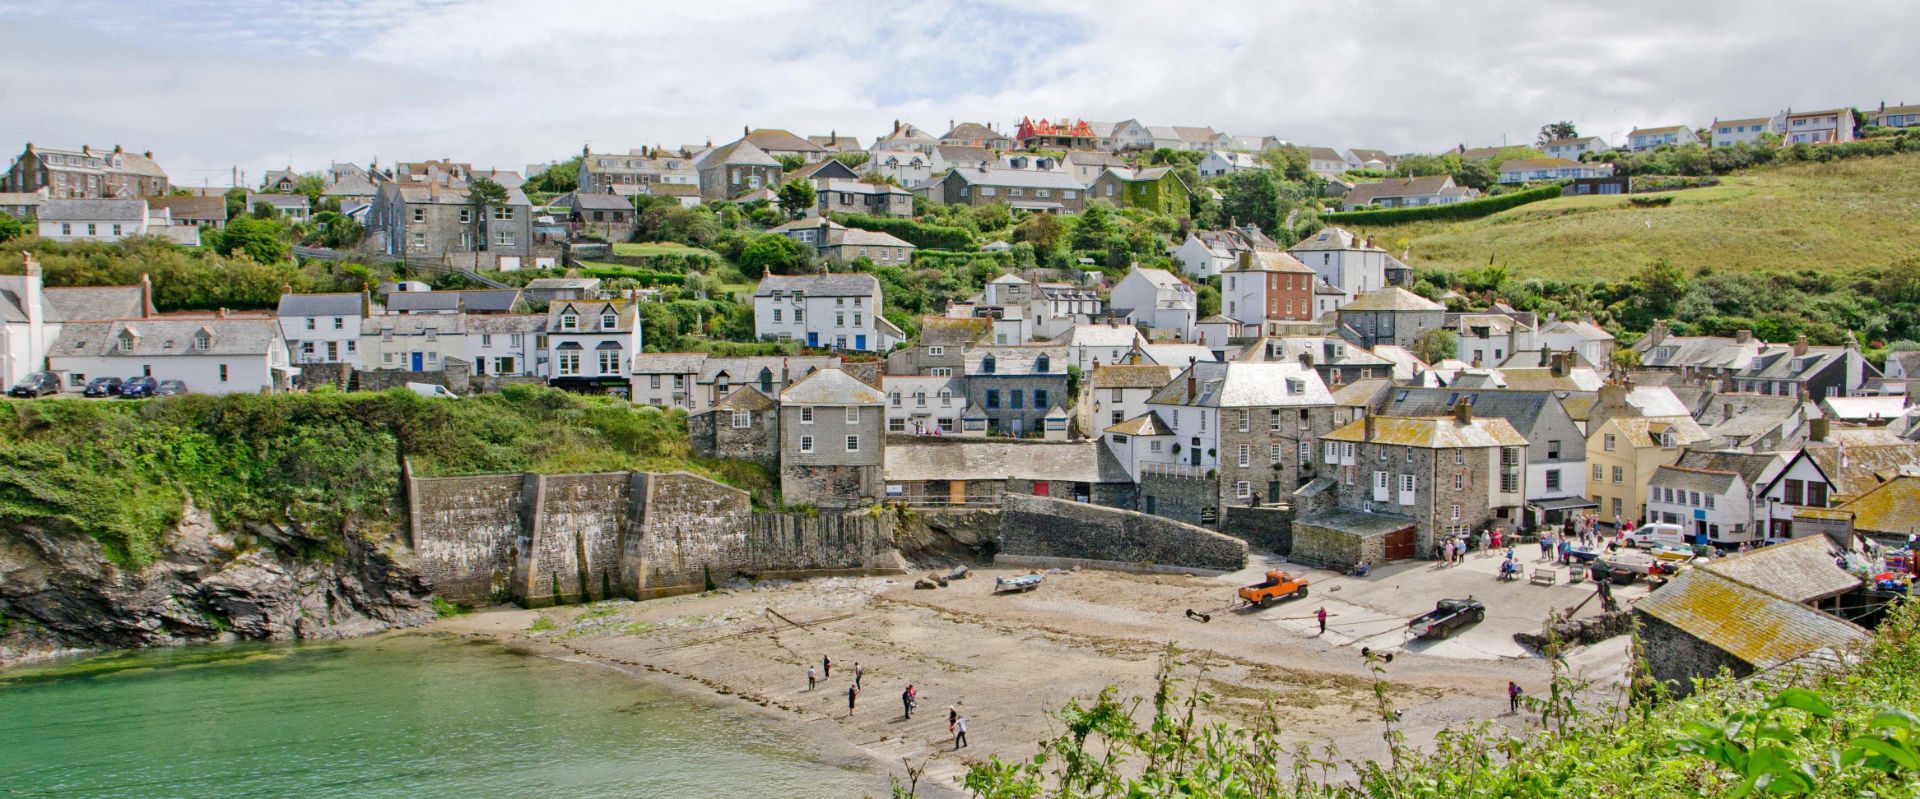 A view of Port Isaac in Cornwall